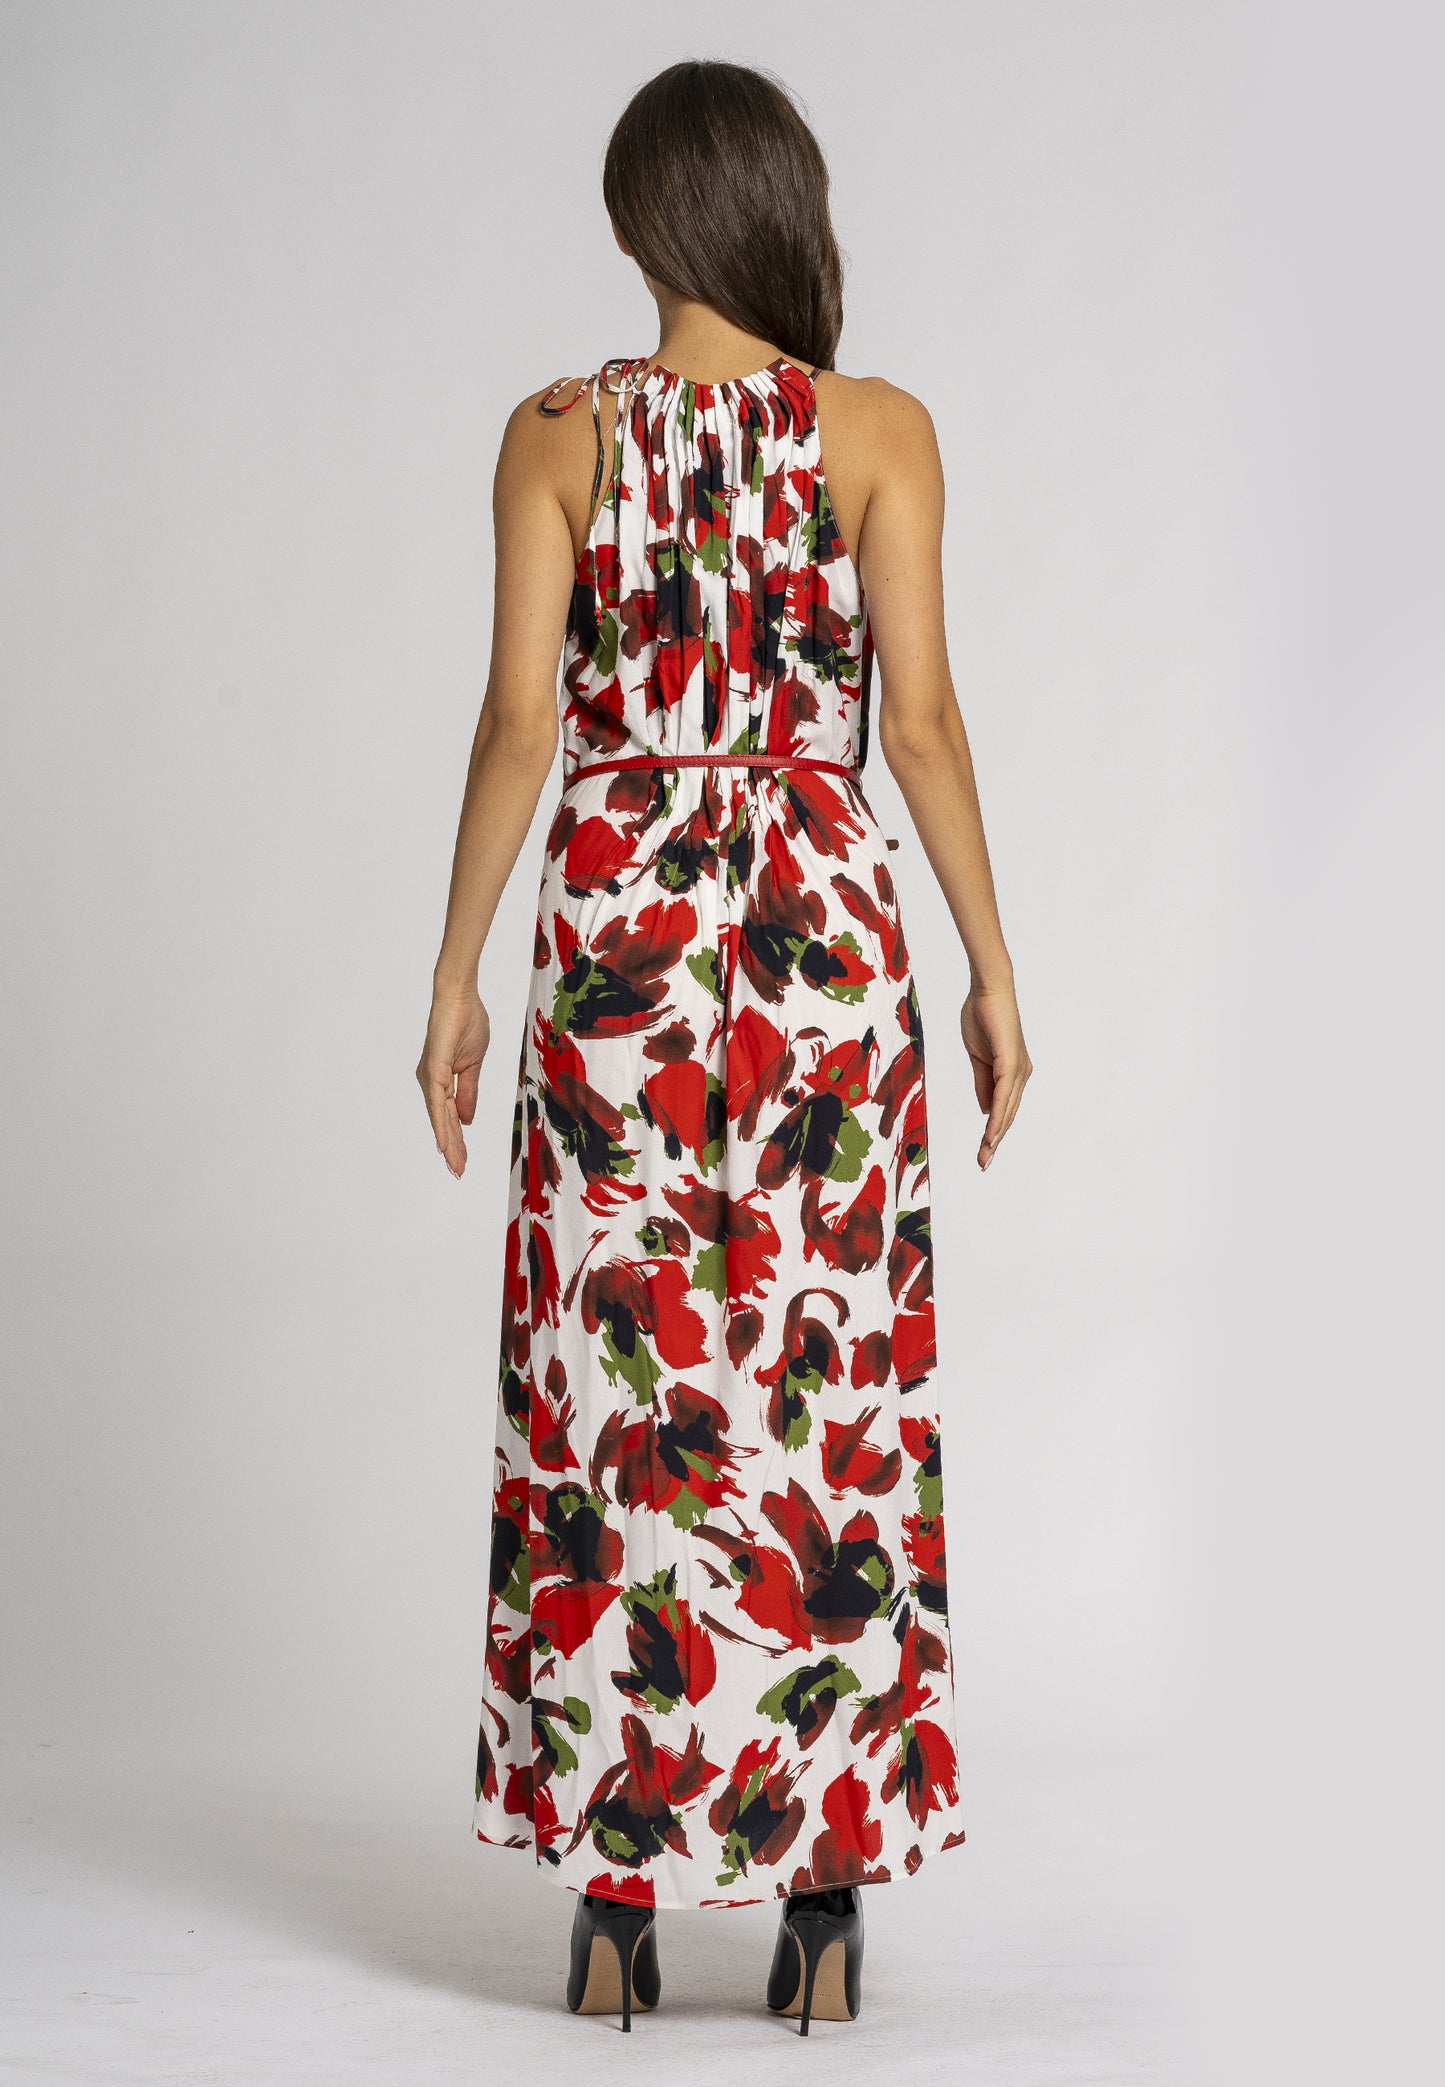 Begonia Floral Maxi Dress - Red Print Viscose Dress with Side Pockets